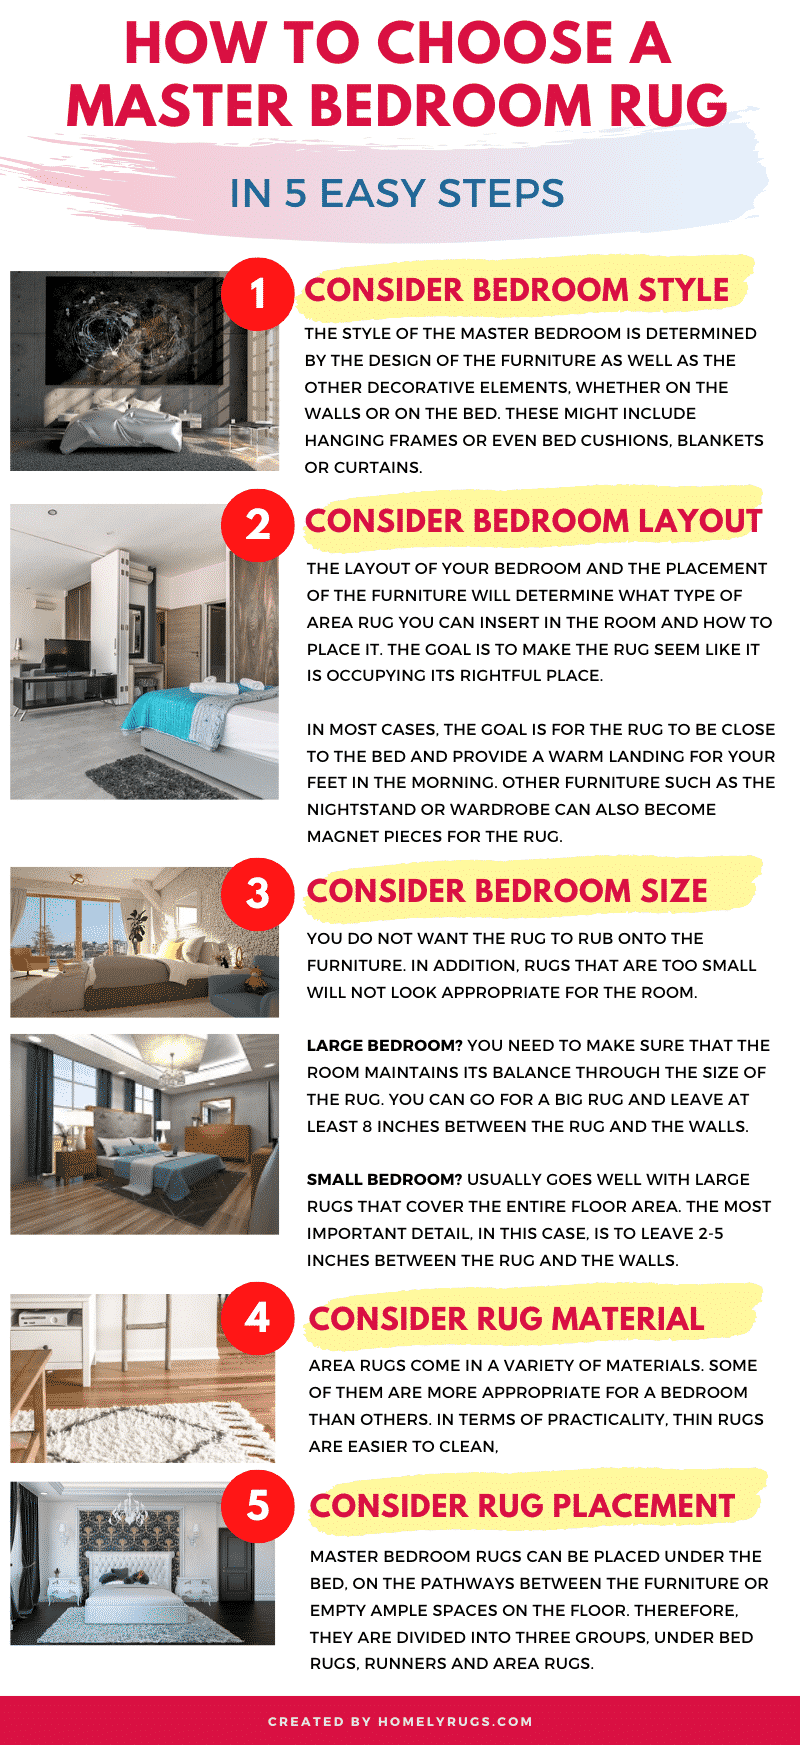 How to Choose a Master Bedroom Rug in 5 Easy Steps Infographic